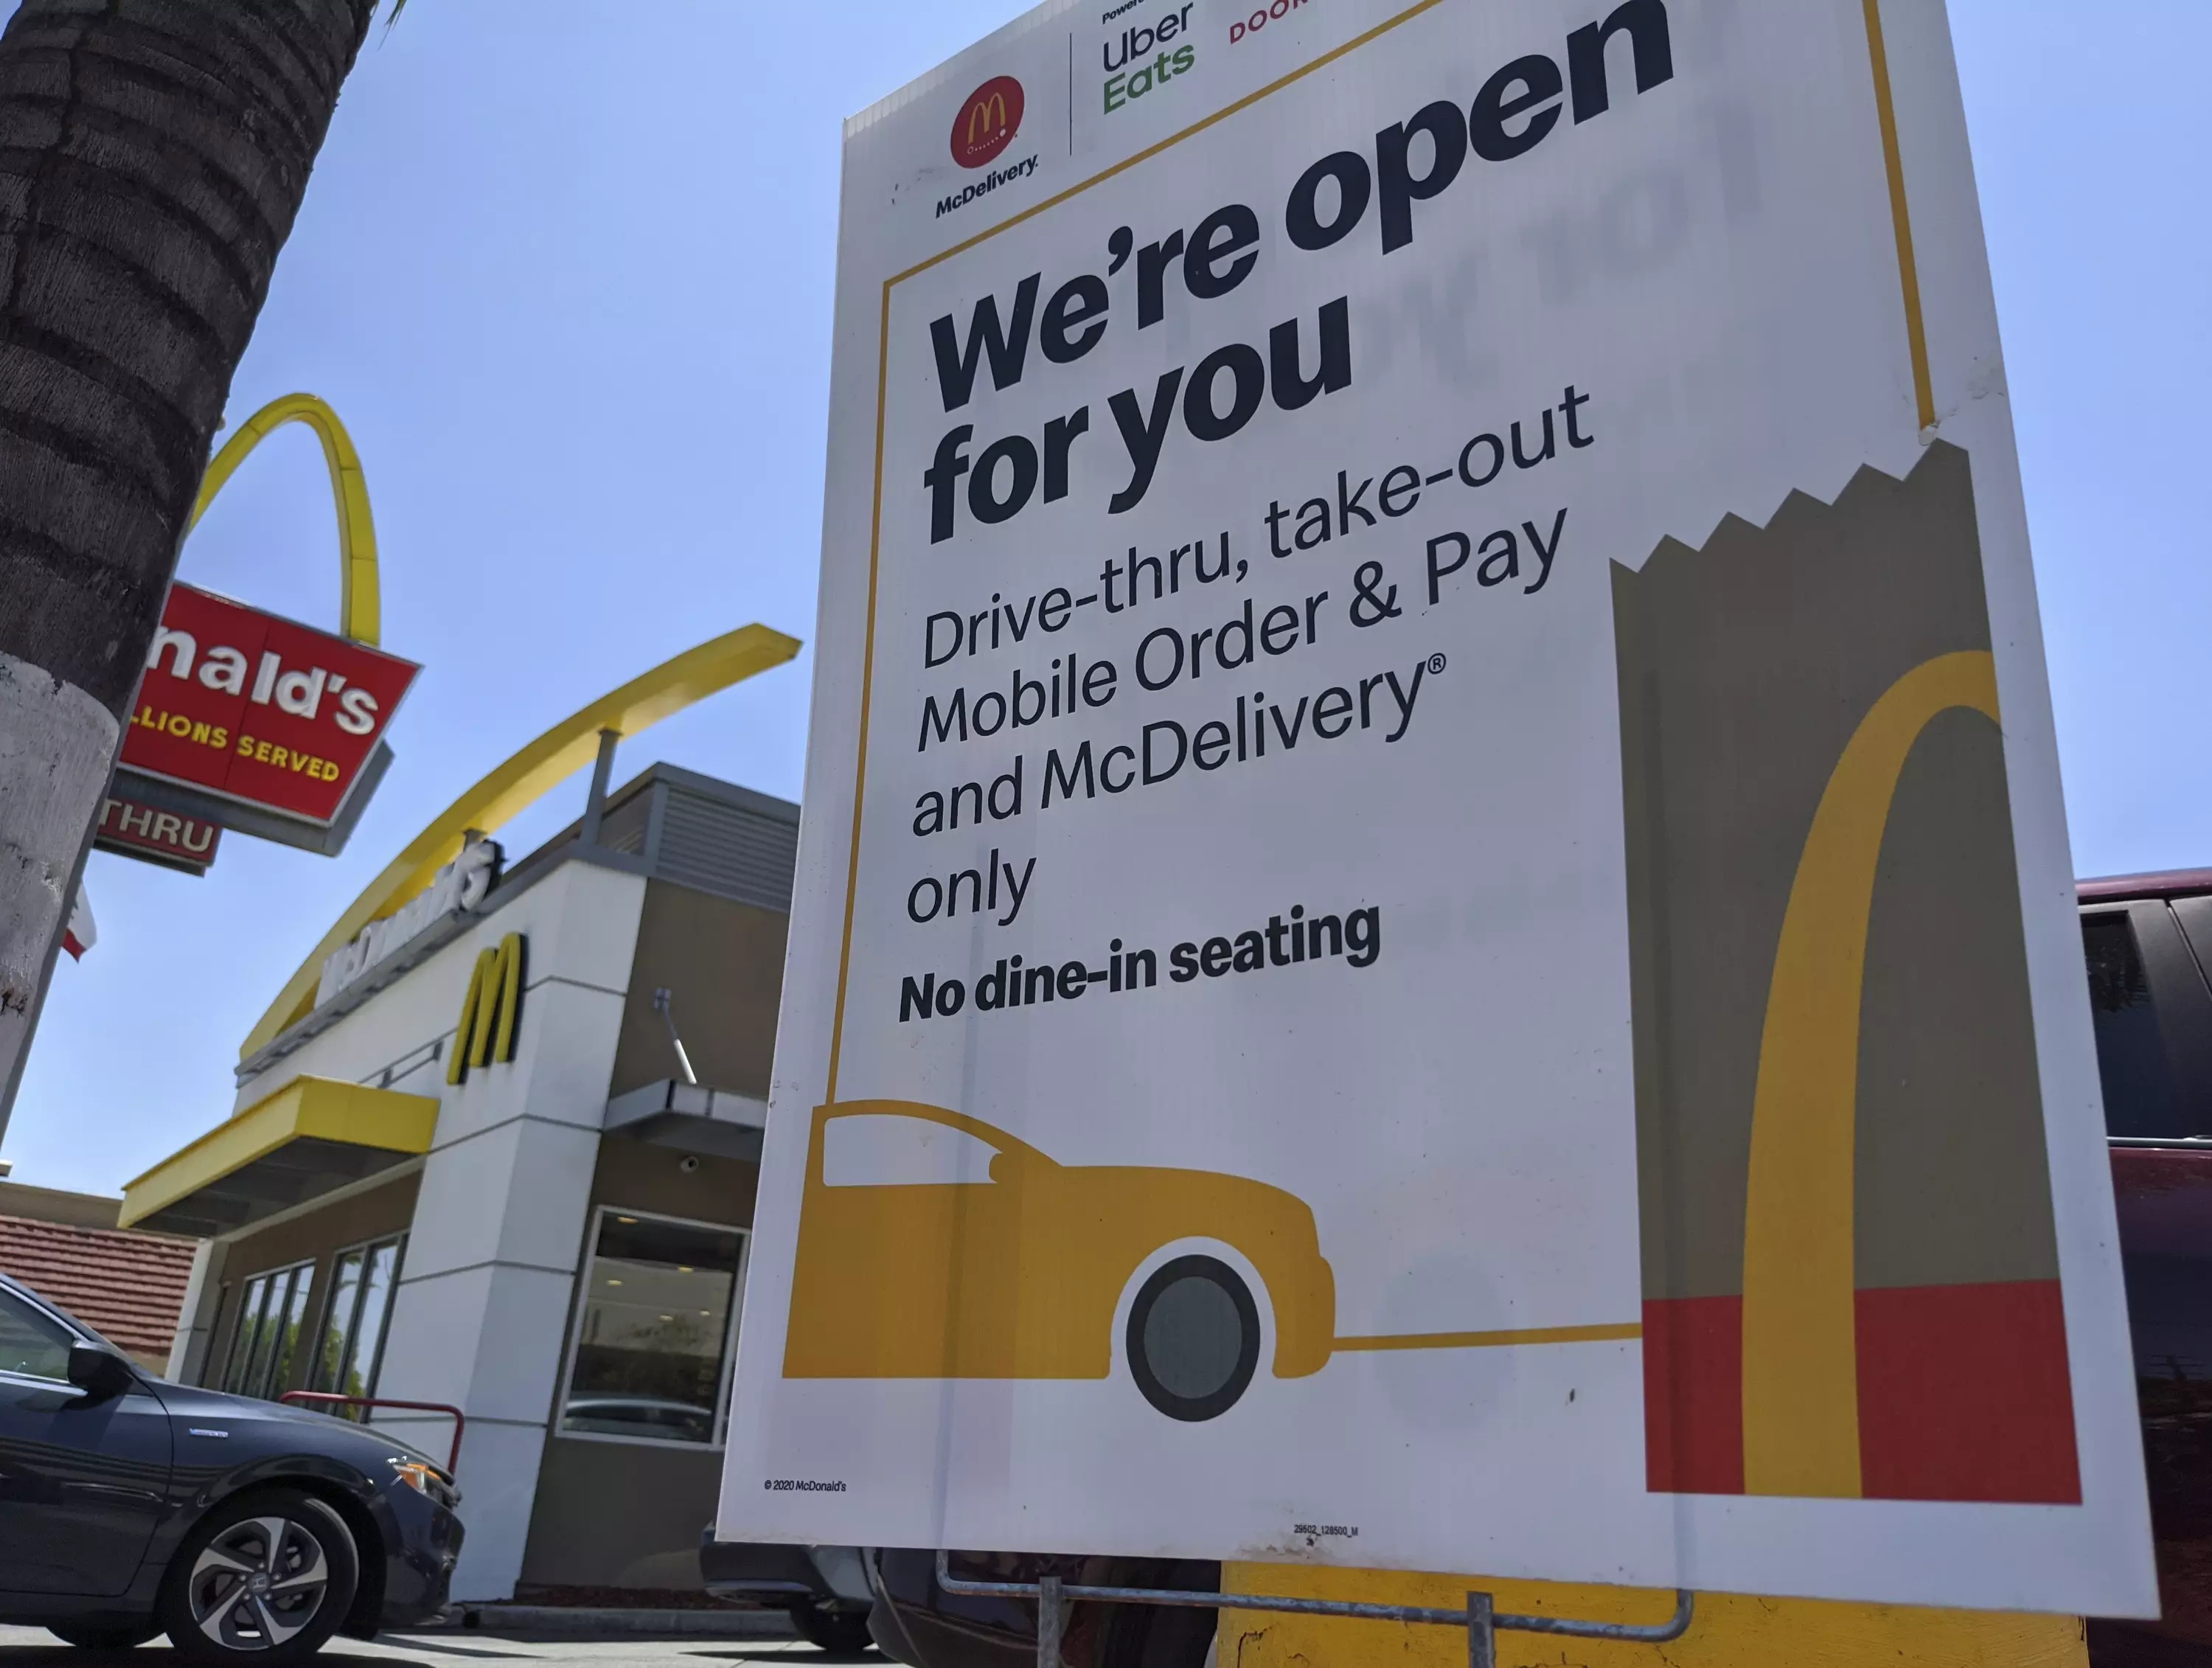 McDonald's has opened some of its UK restaurants for drive-thru and delivery.